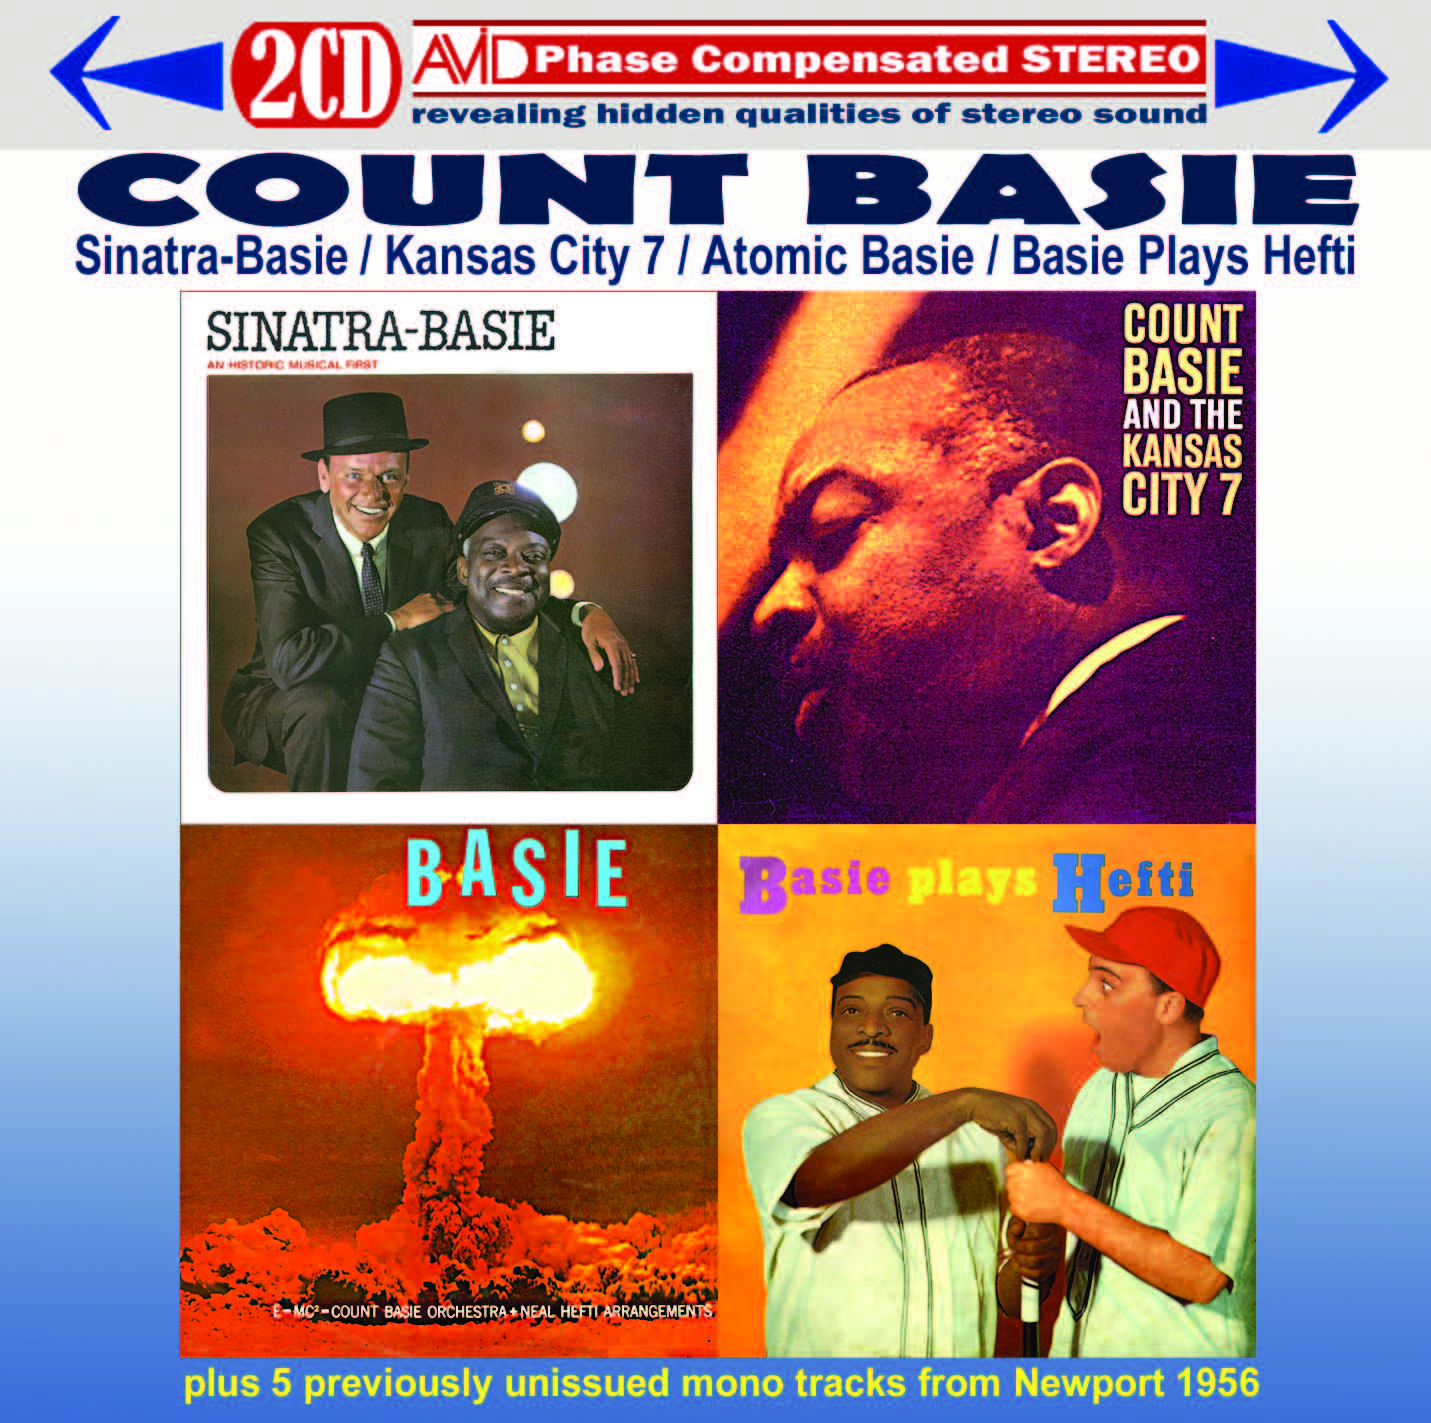 Count Basie: Four Classic Albums Plus (Sinatra - Basie / Count Basie And  The Kansas City 7 / The Atomic Mr Basie / Basie Plays Hefti) (2CD)